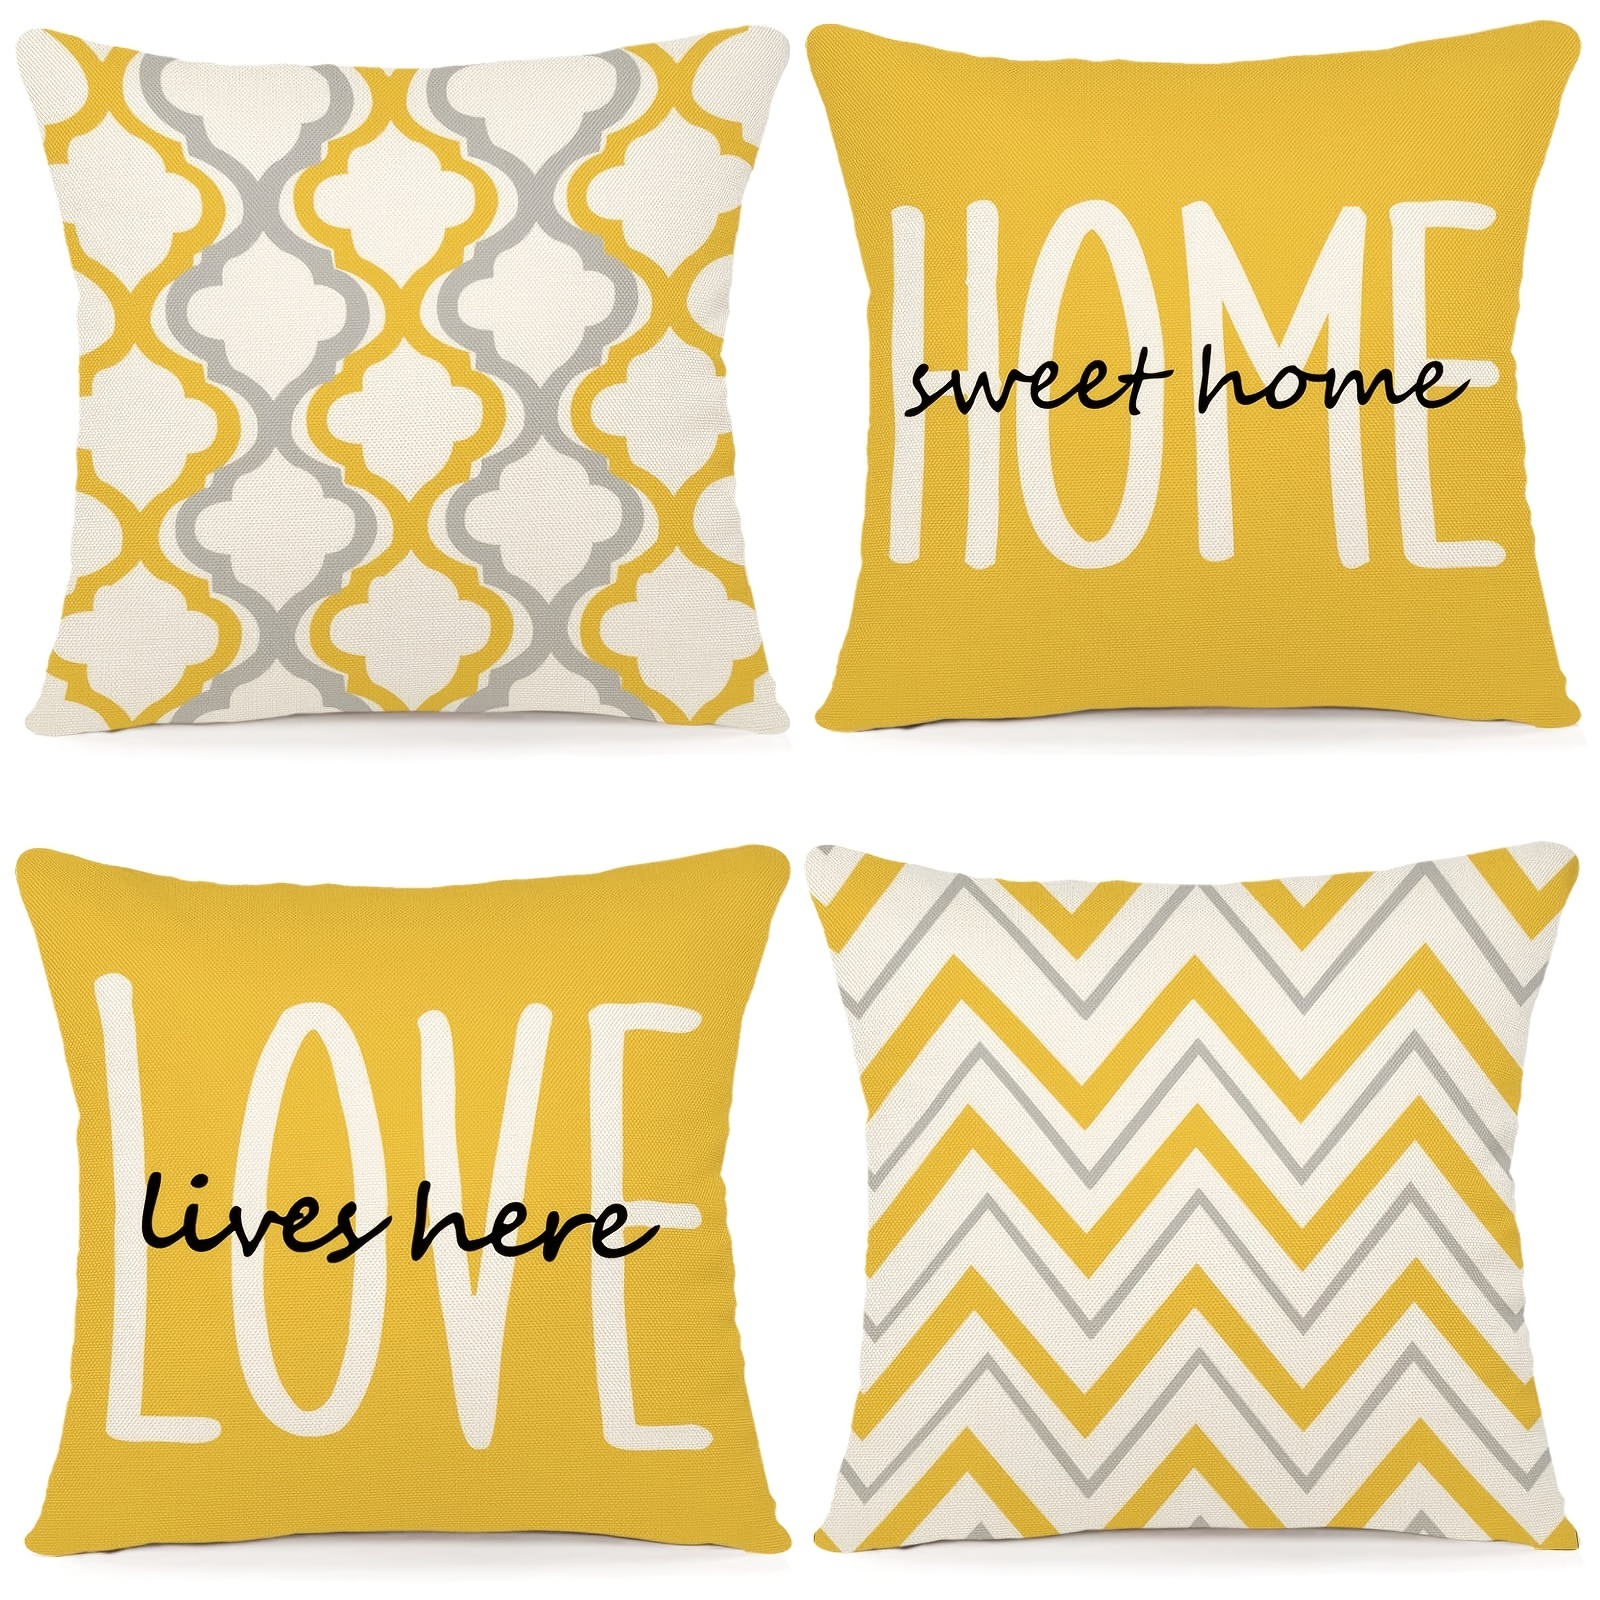 4pcs Geometric Throw Pillow Covers For Couch Sofa Bedroom Home Decor